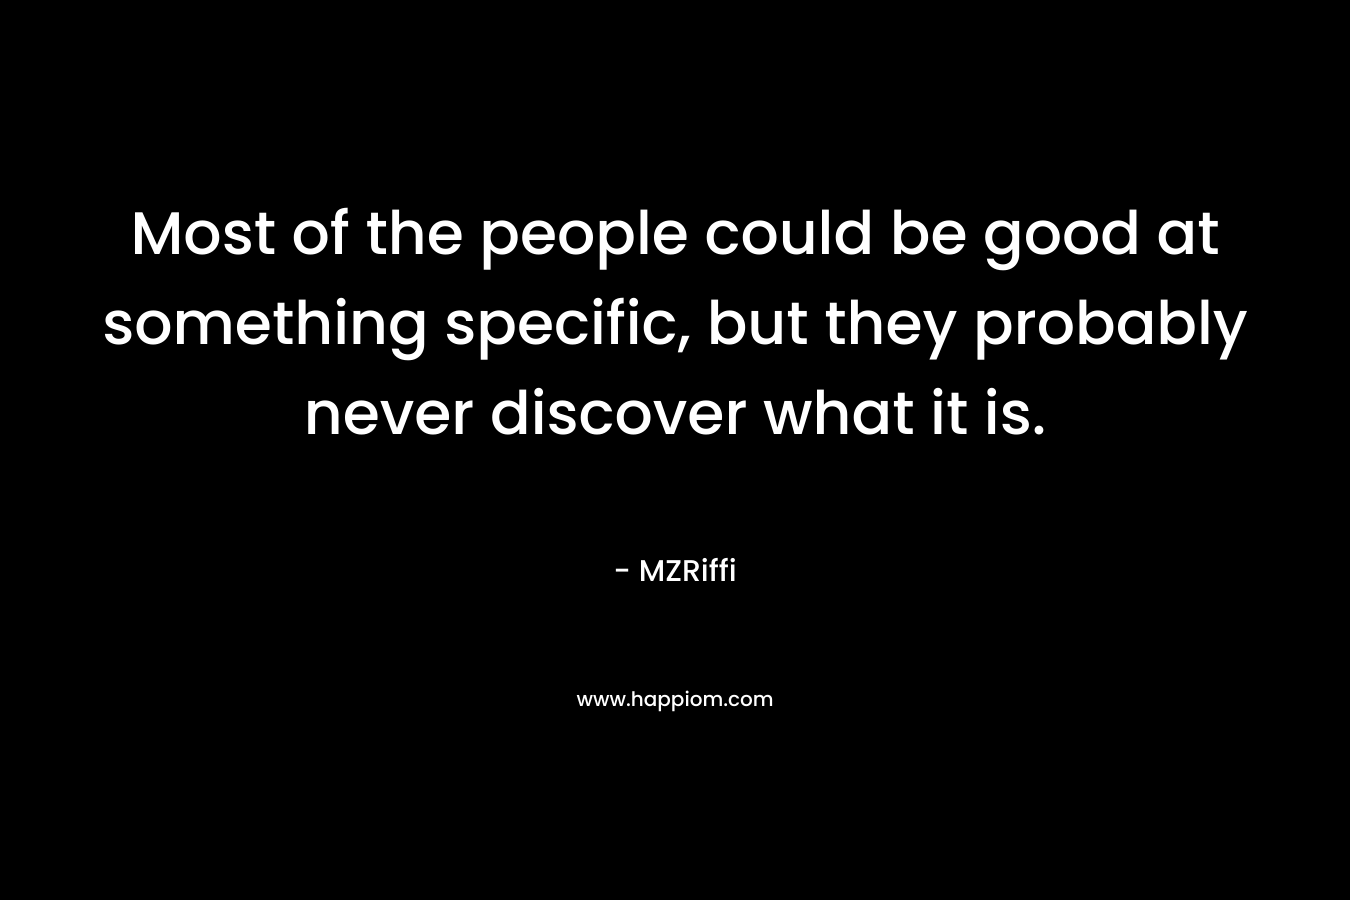 Most of the people could be good at something specific, but they probably never discover what it is. – MZRiffi